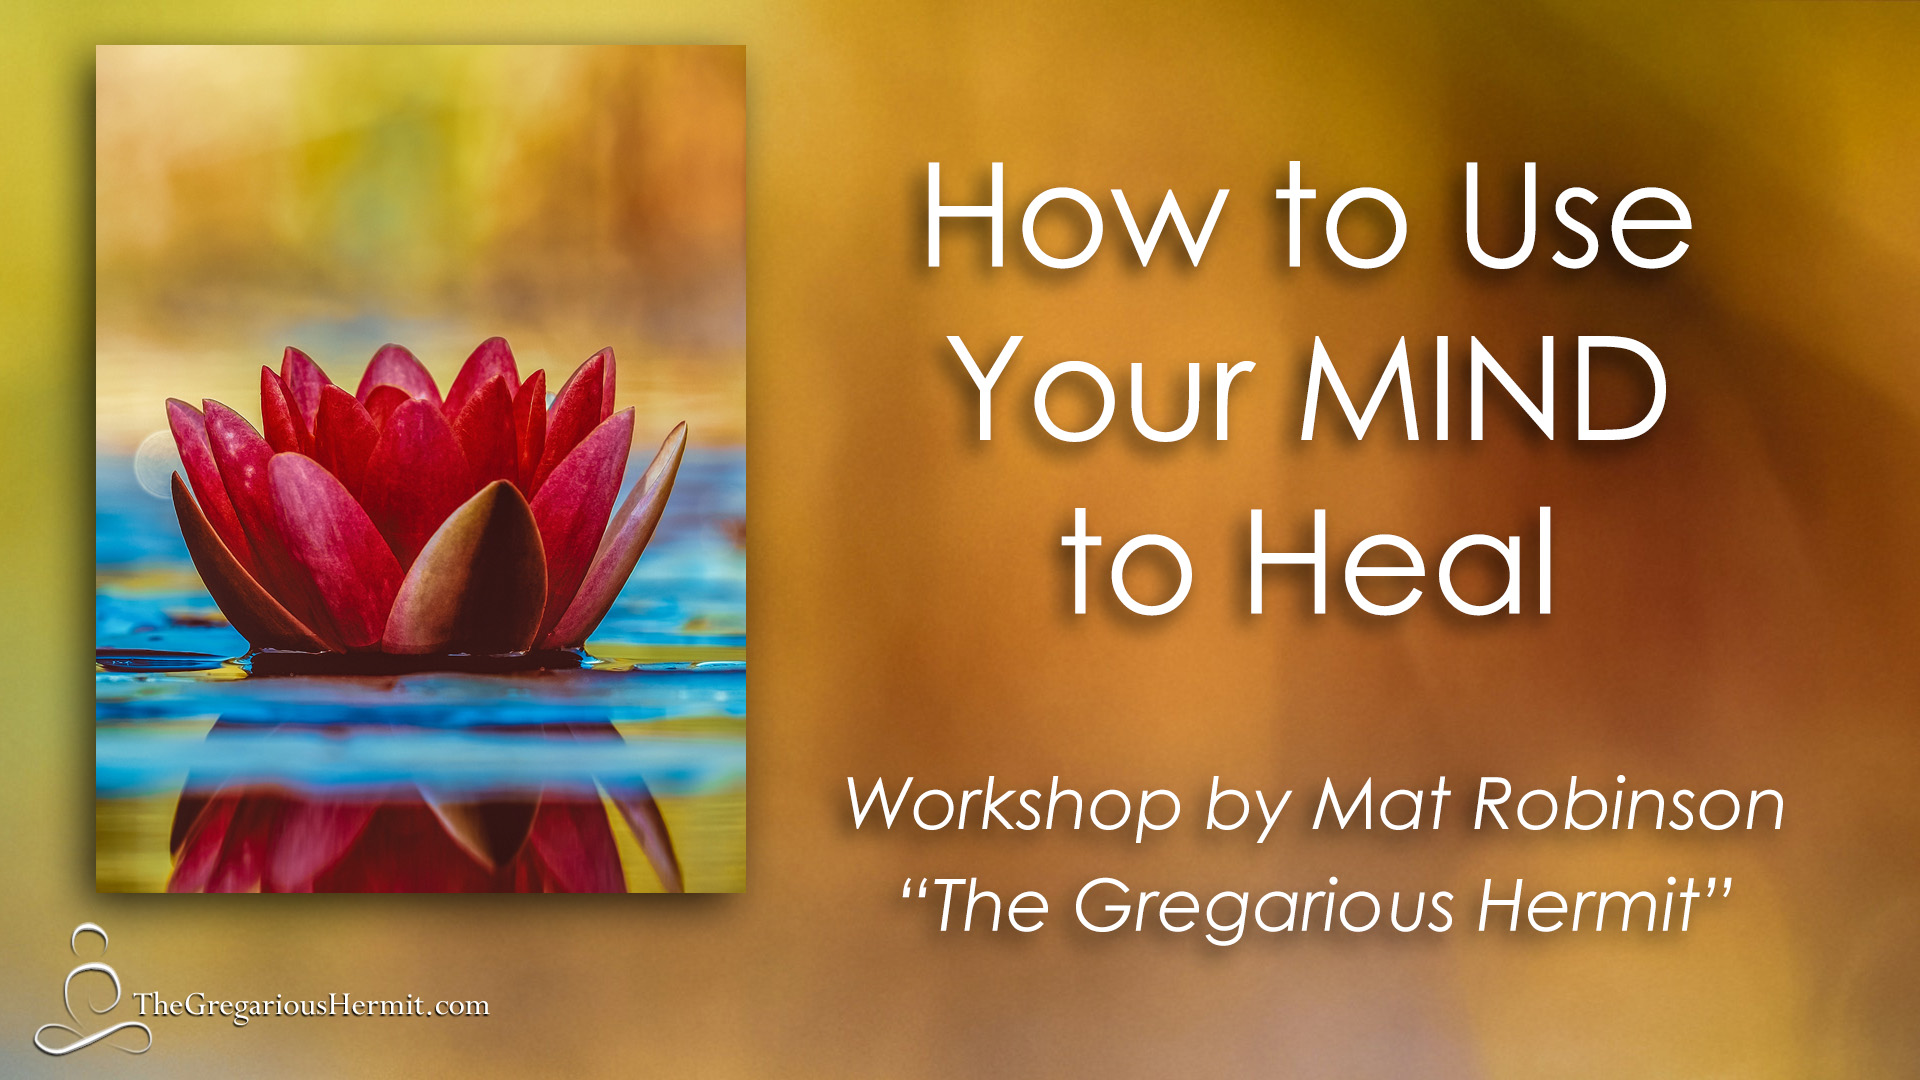 How to use your mind to heal - workshop by Mat Robinson, The Gregarious Hermit